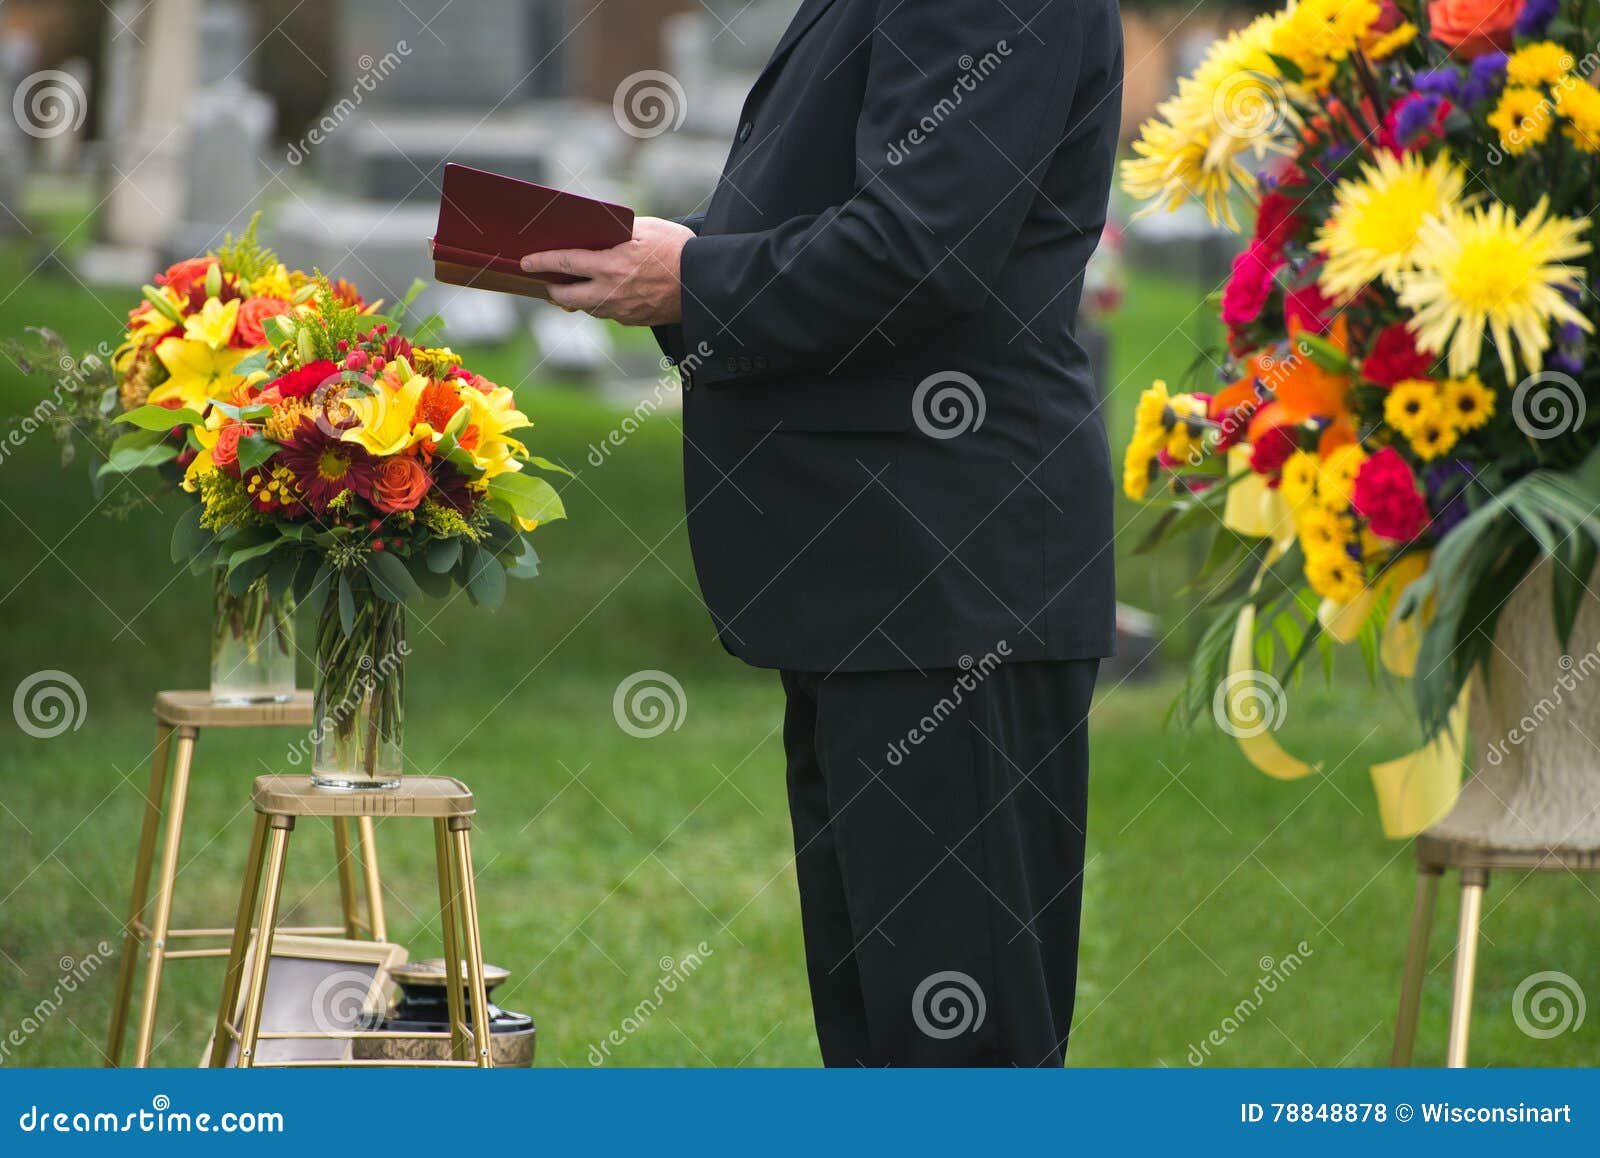 funeral, burial service, death, grief